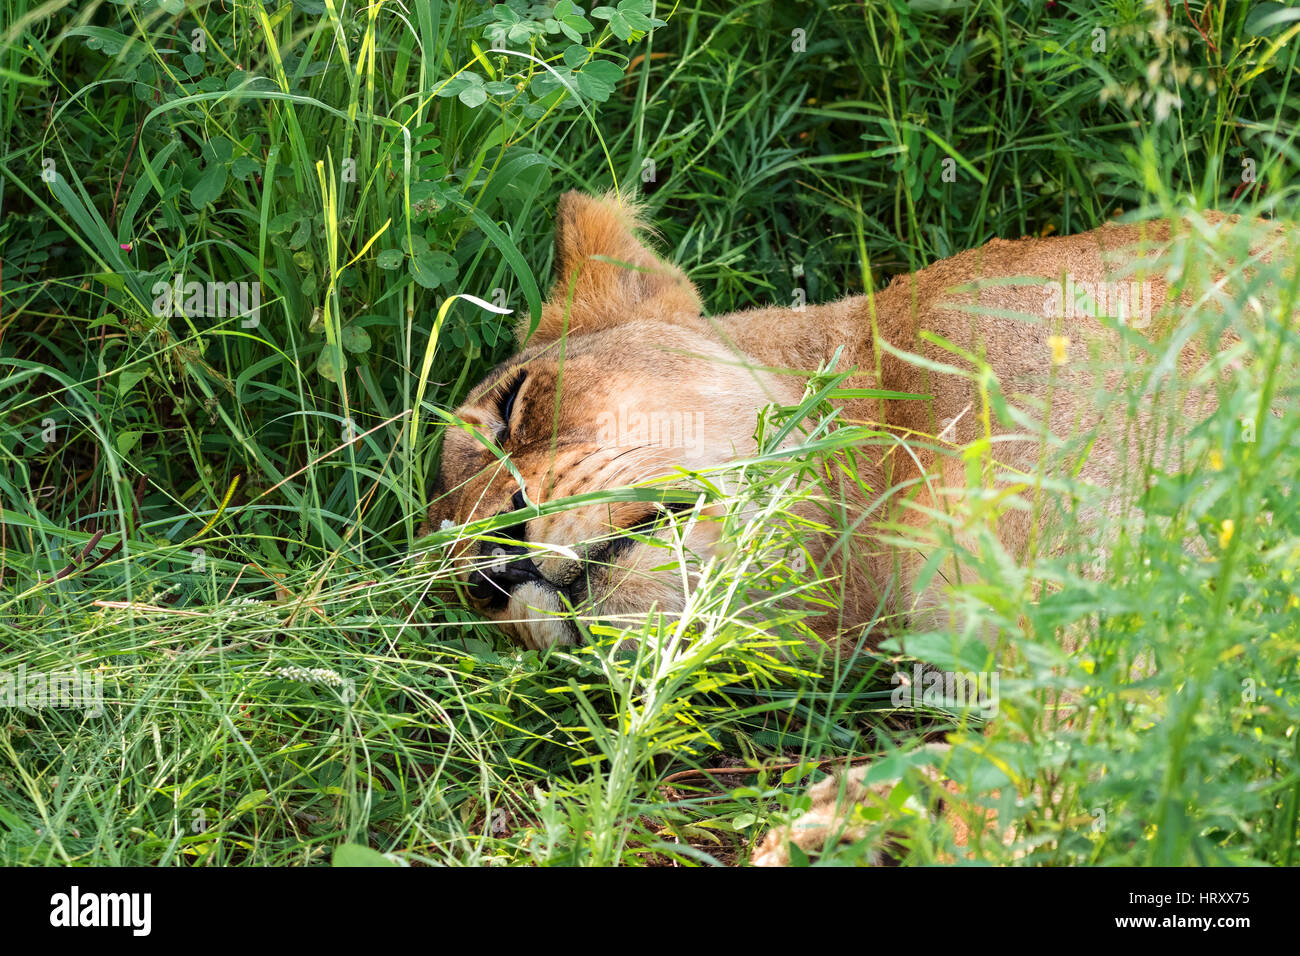 female lion lioness sleeping relaxed in the grass Stock Photo